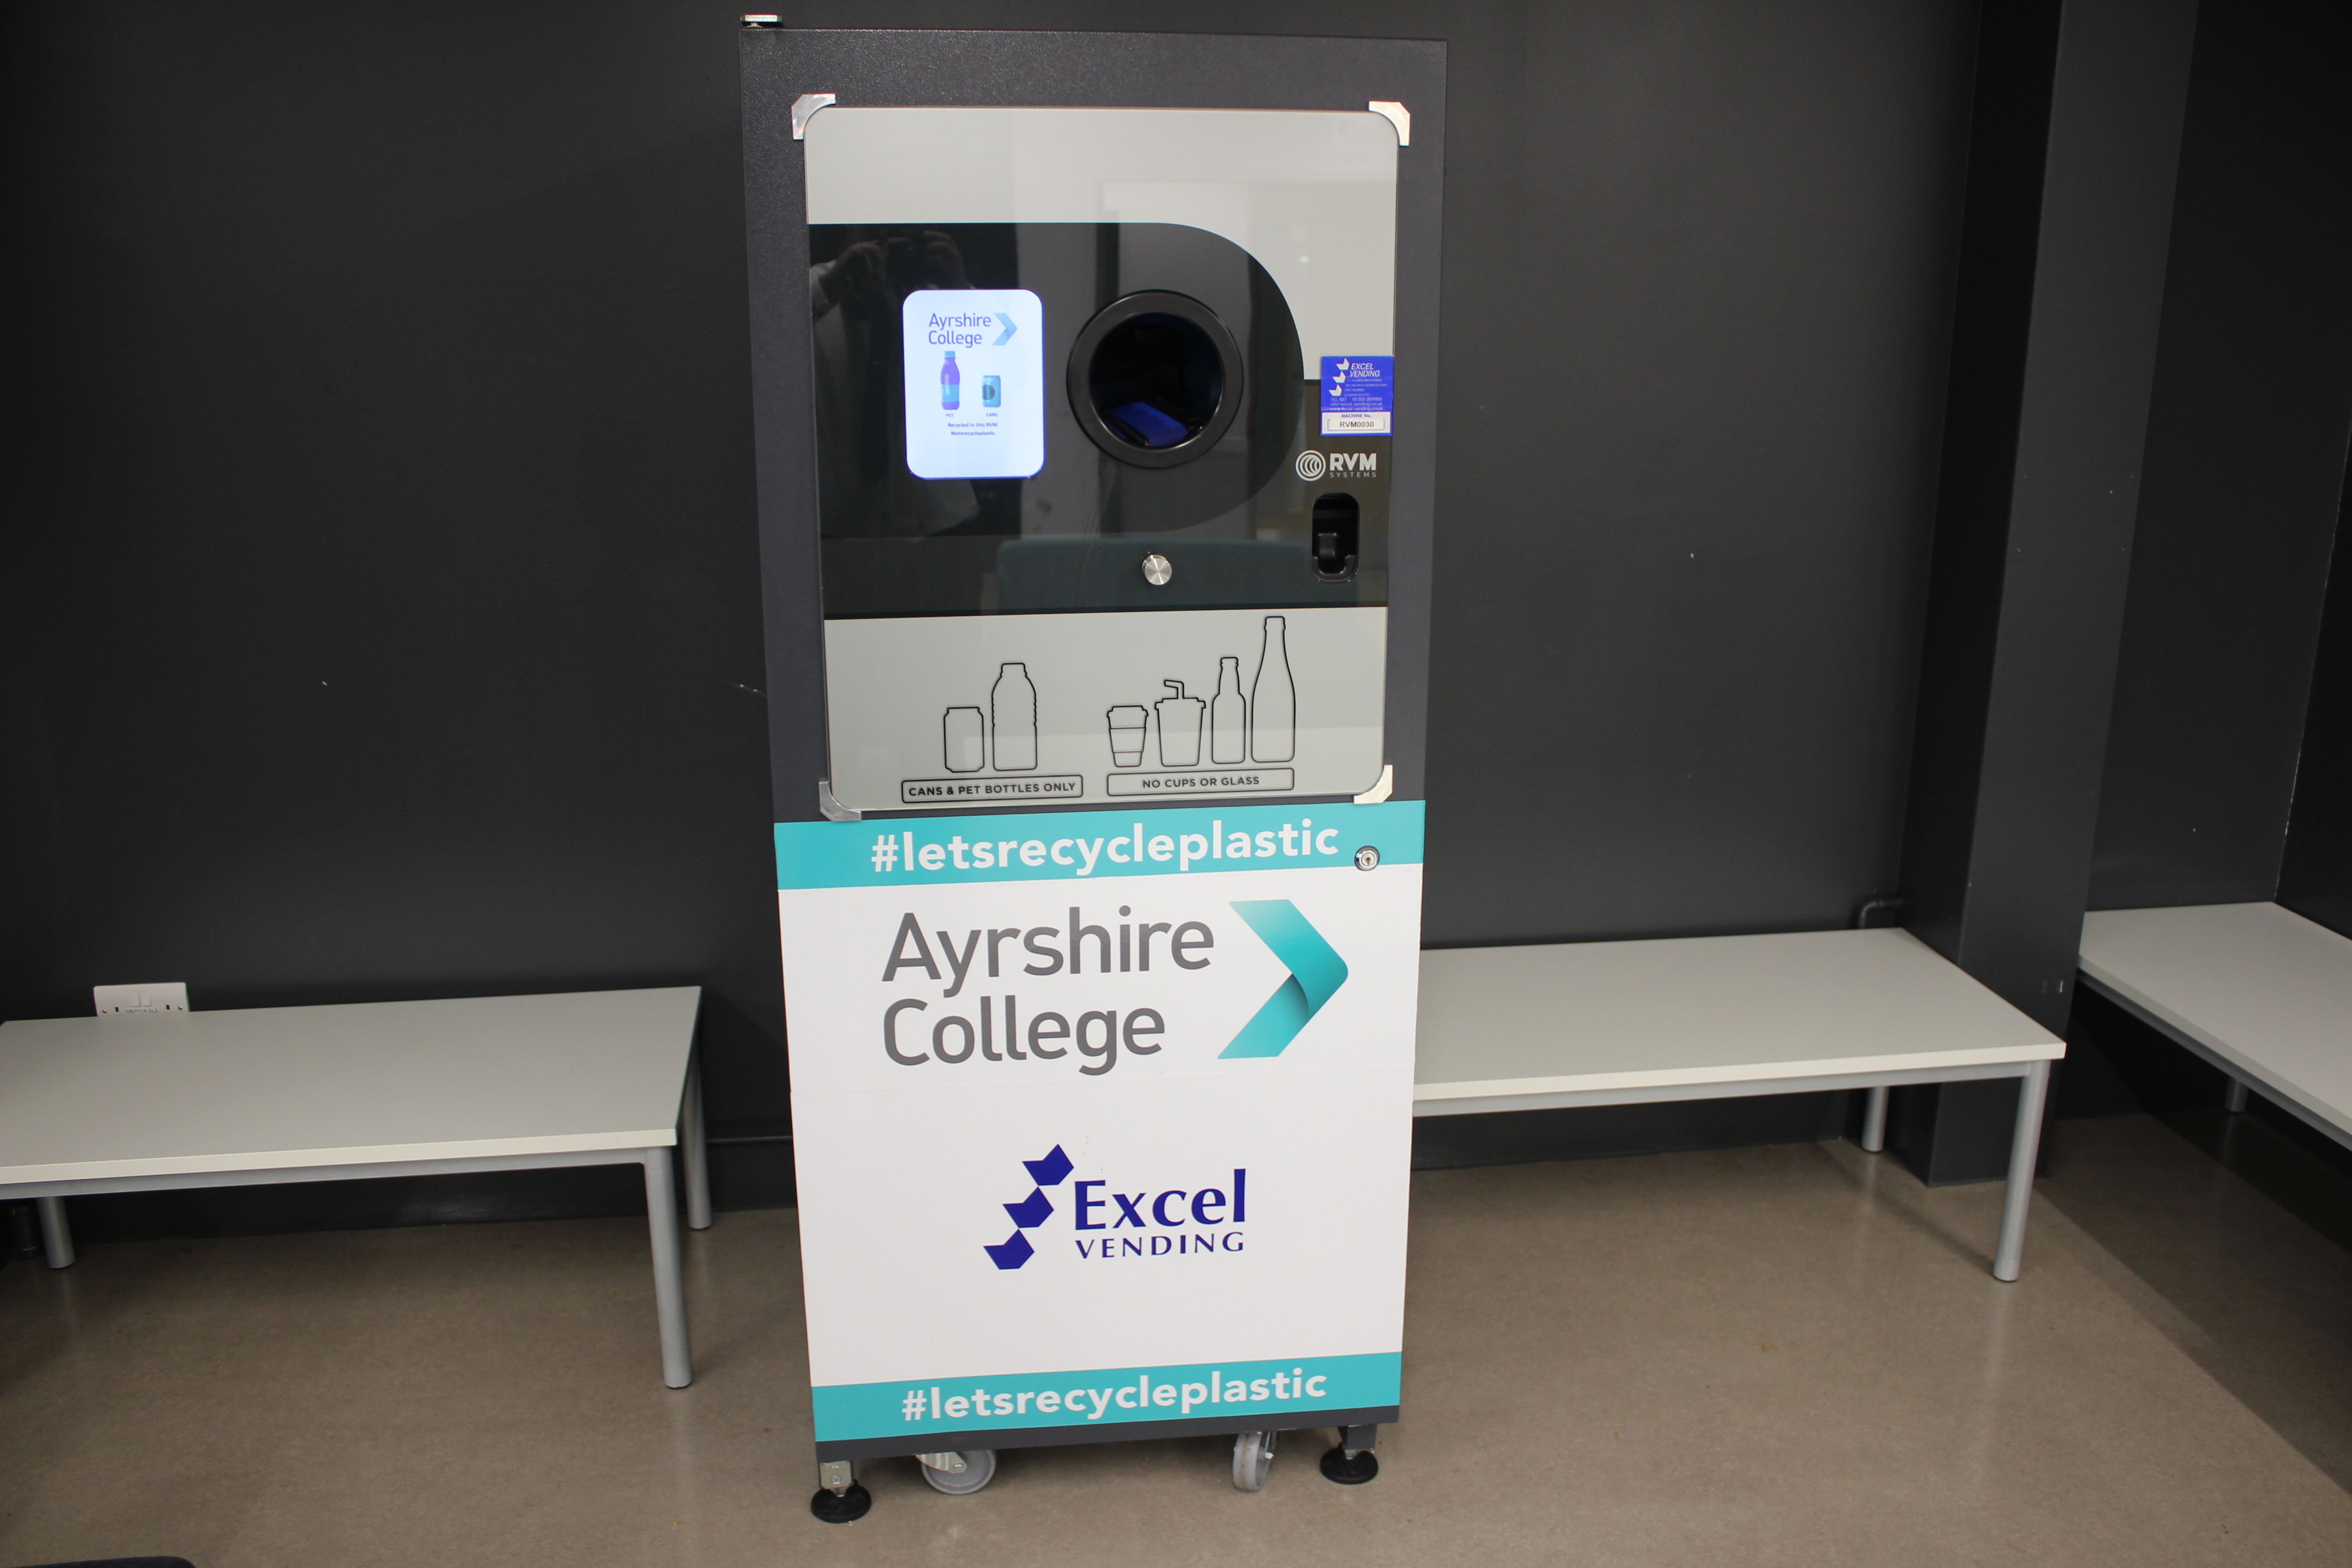 New recycling scheme piloted at Ayrshire College